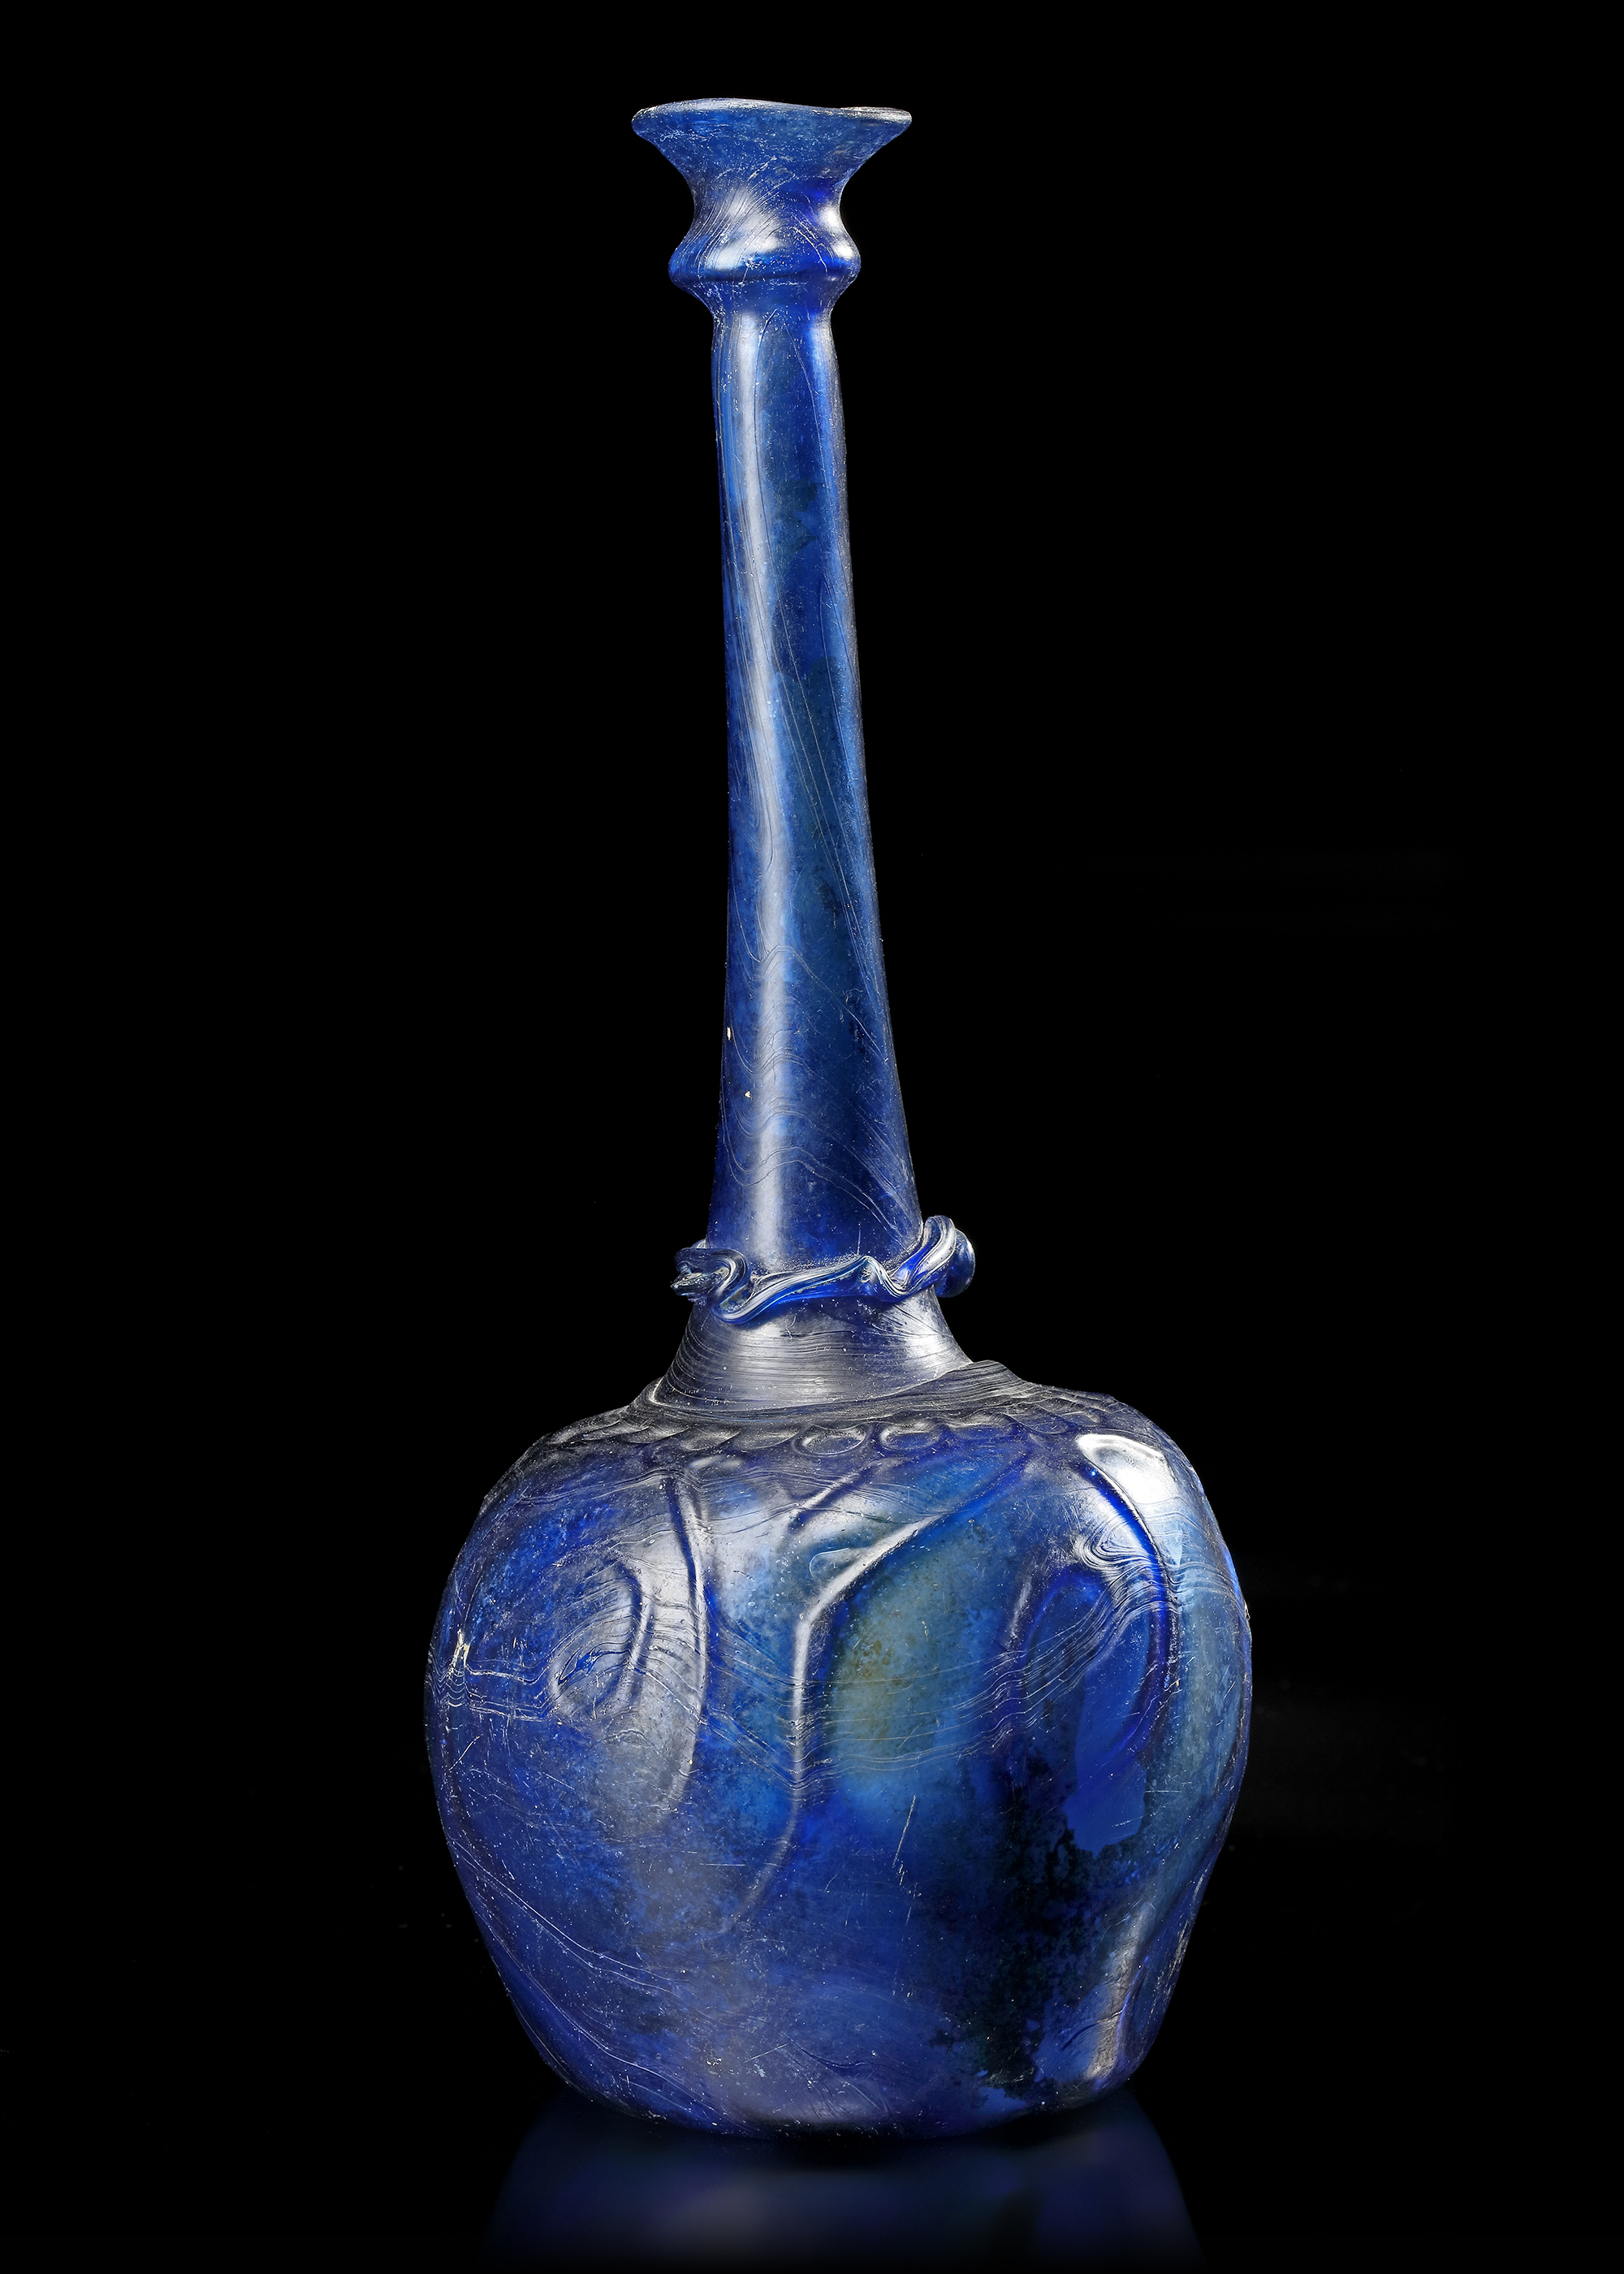 A LARGE MOULD-BLOWN BLUE GLASS BOTTLE-VASE OR SPRINKLER, PERSIA, 12TH CENTURY - Image 12 of 14